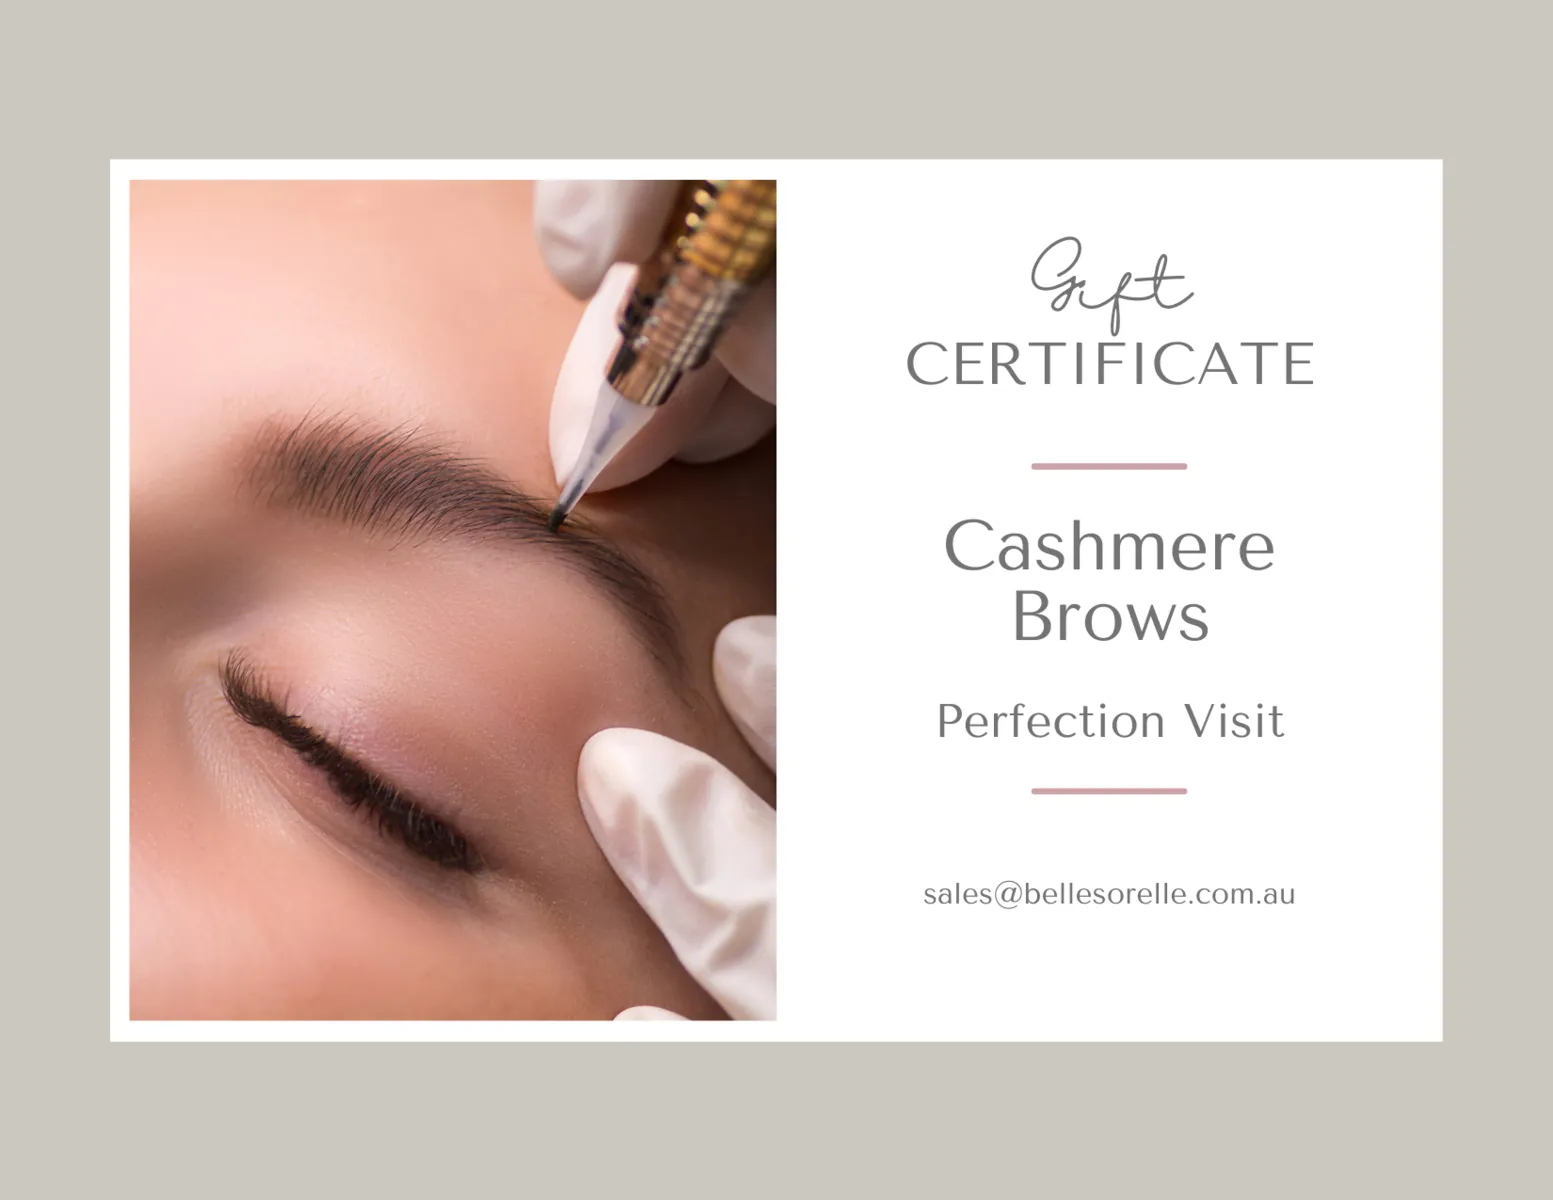 Cashmere Brows - Perfection Visit